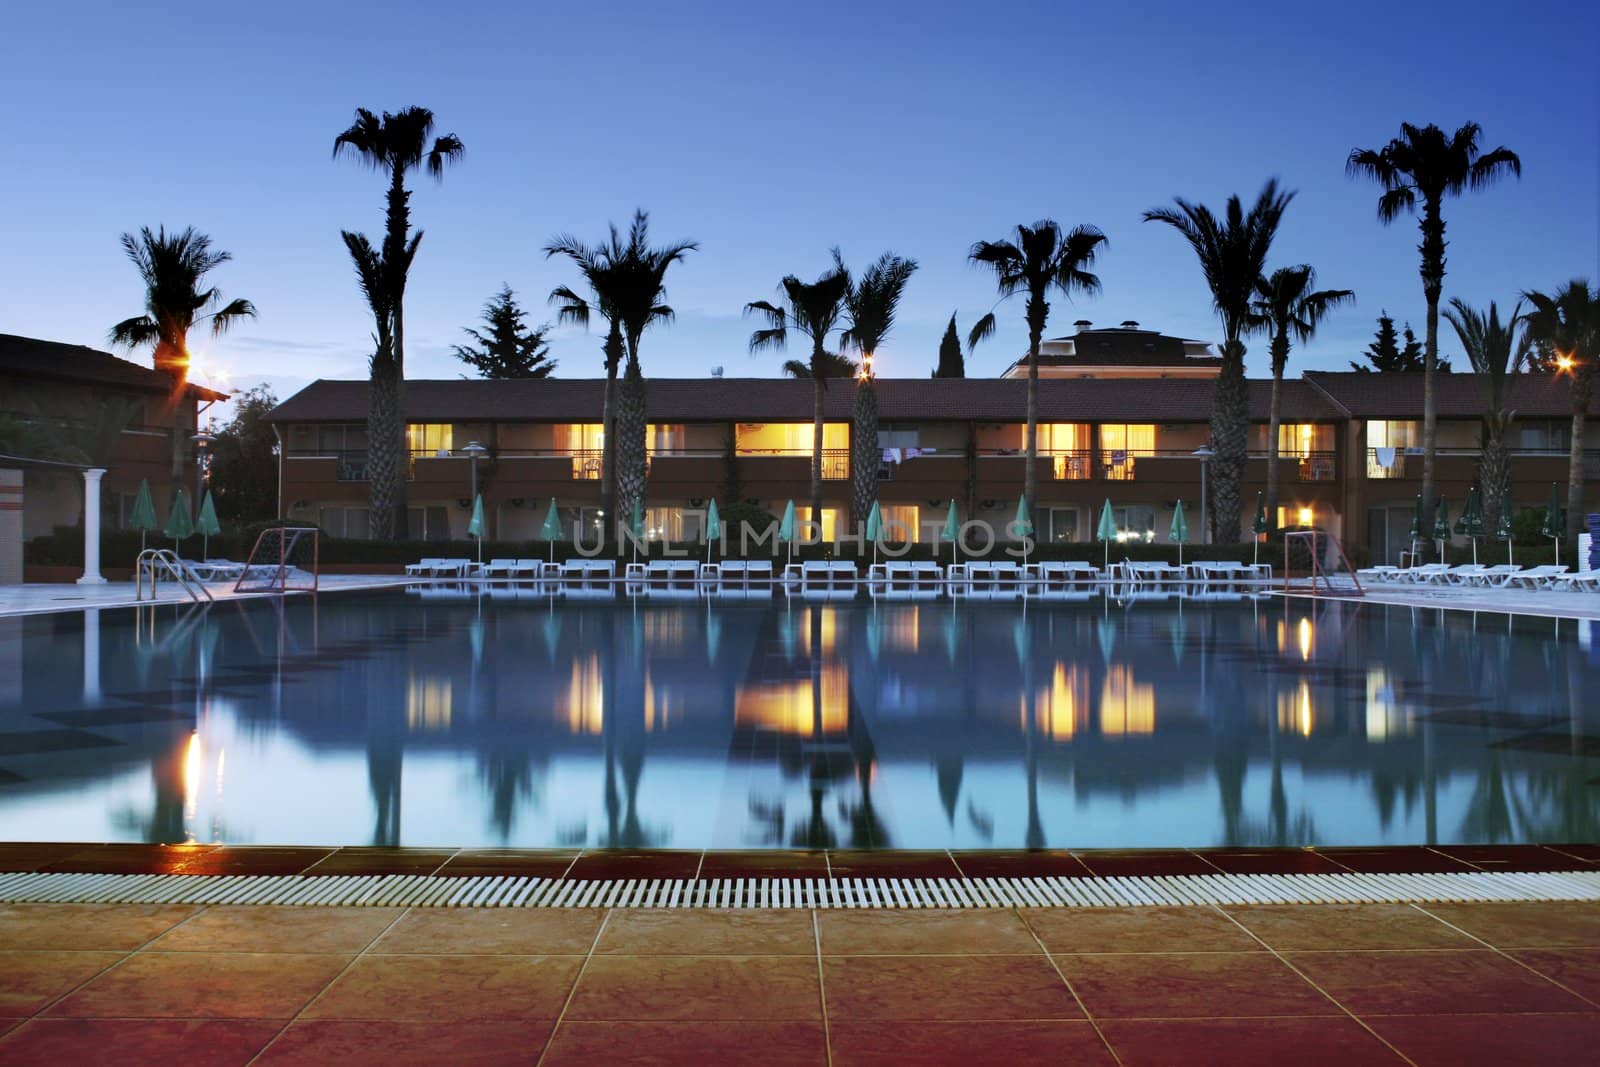 Night time photo of a swimming pool at a mediterranean resort.